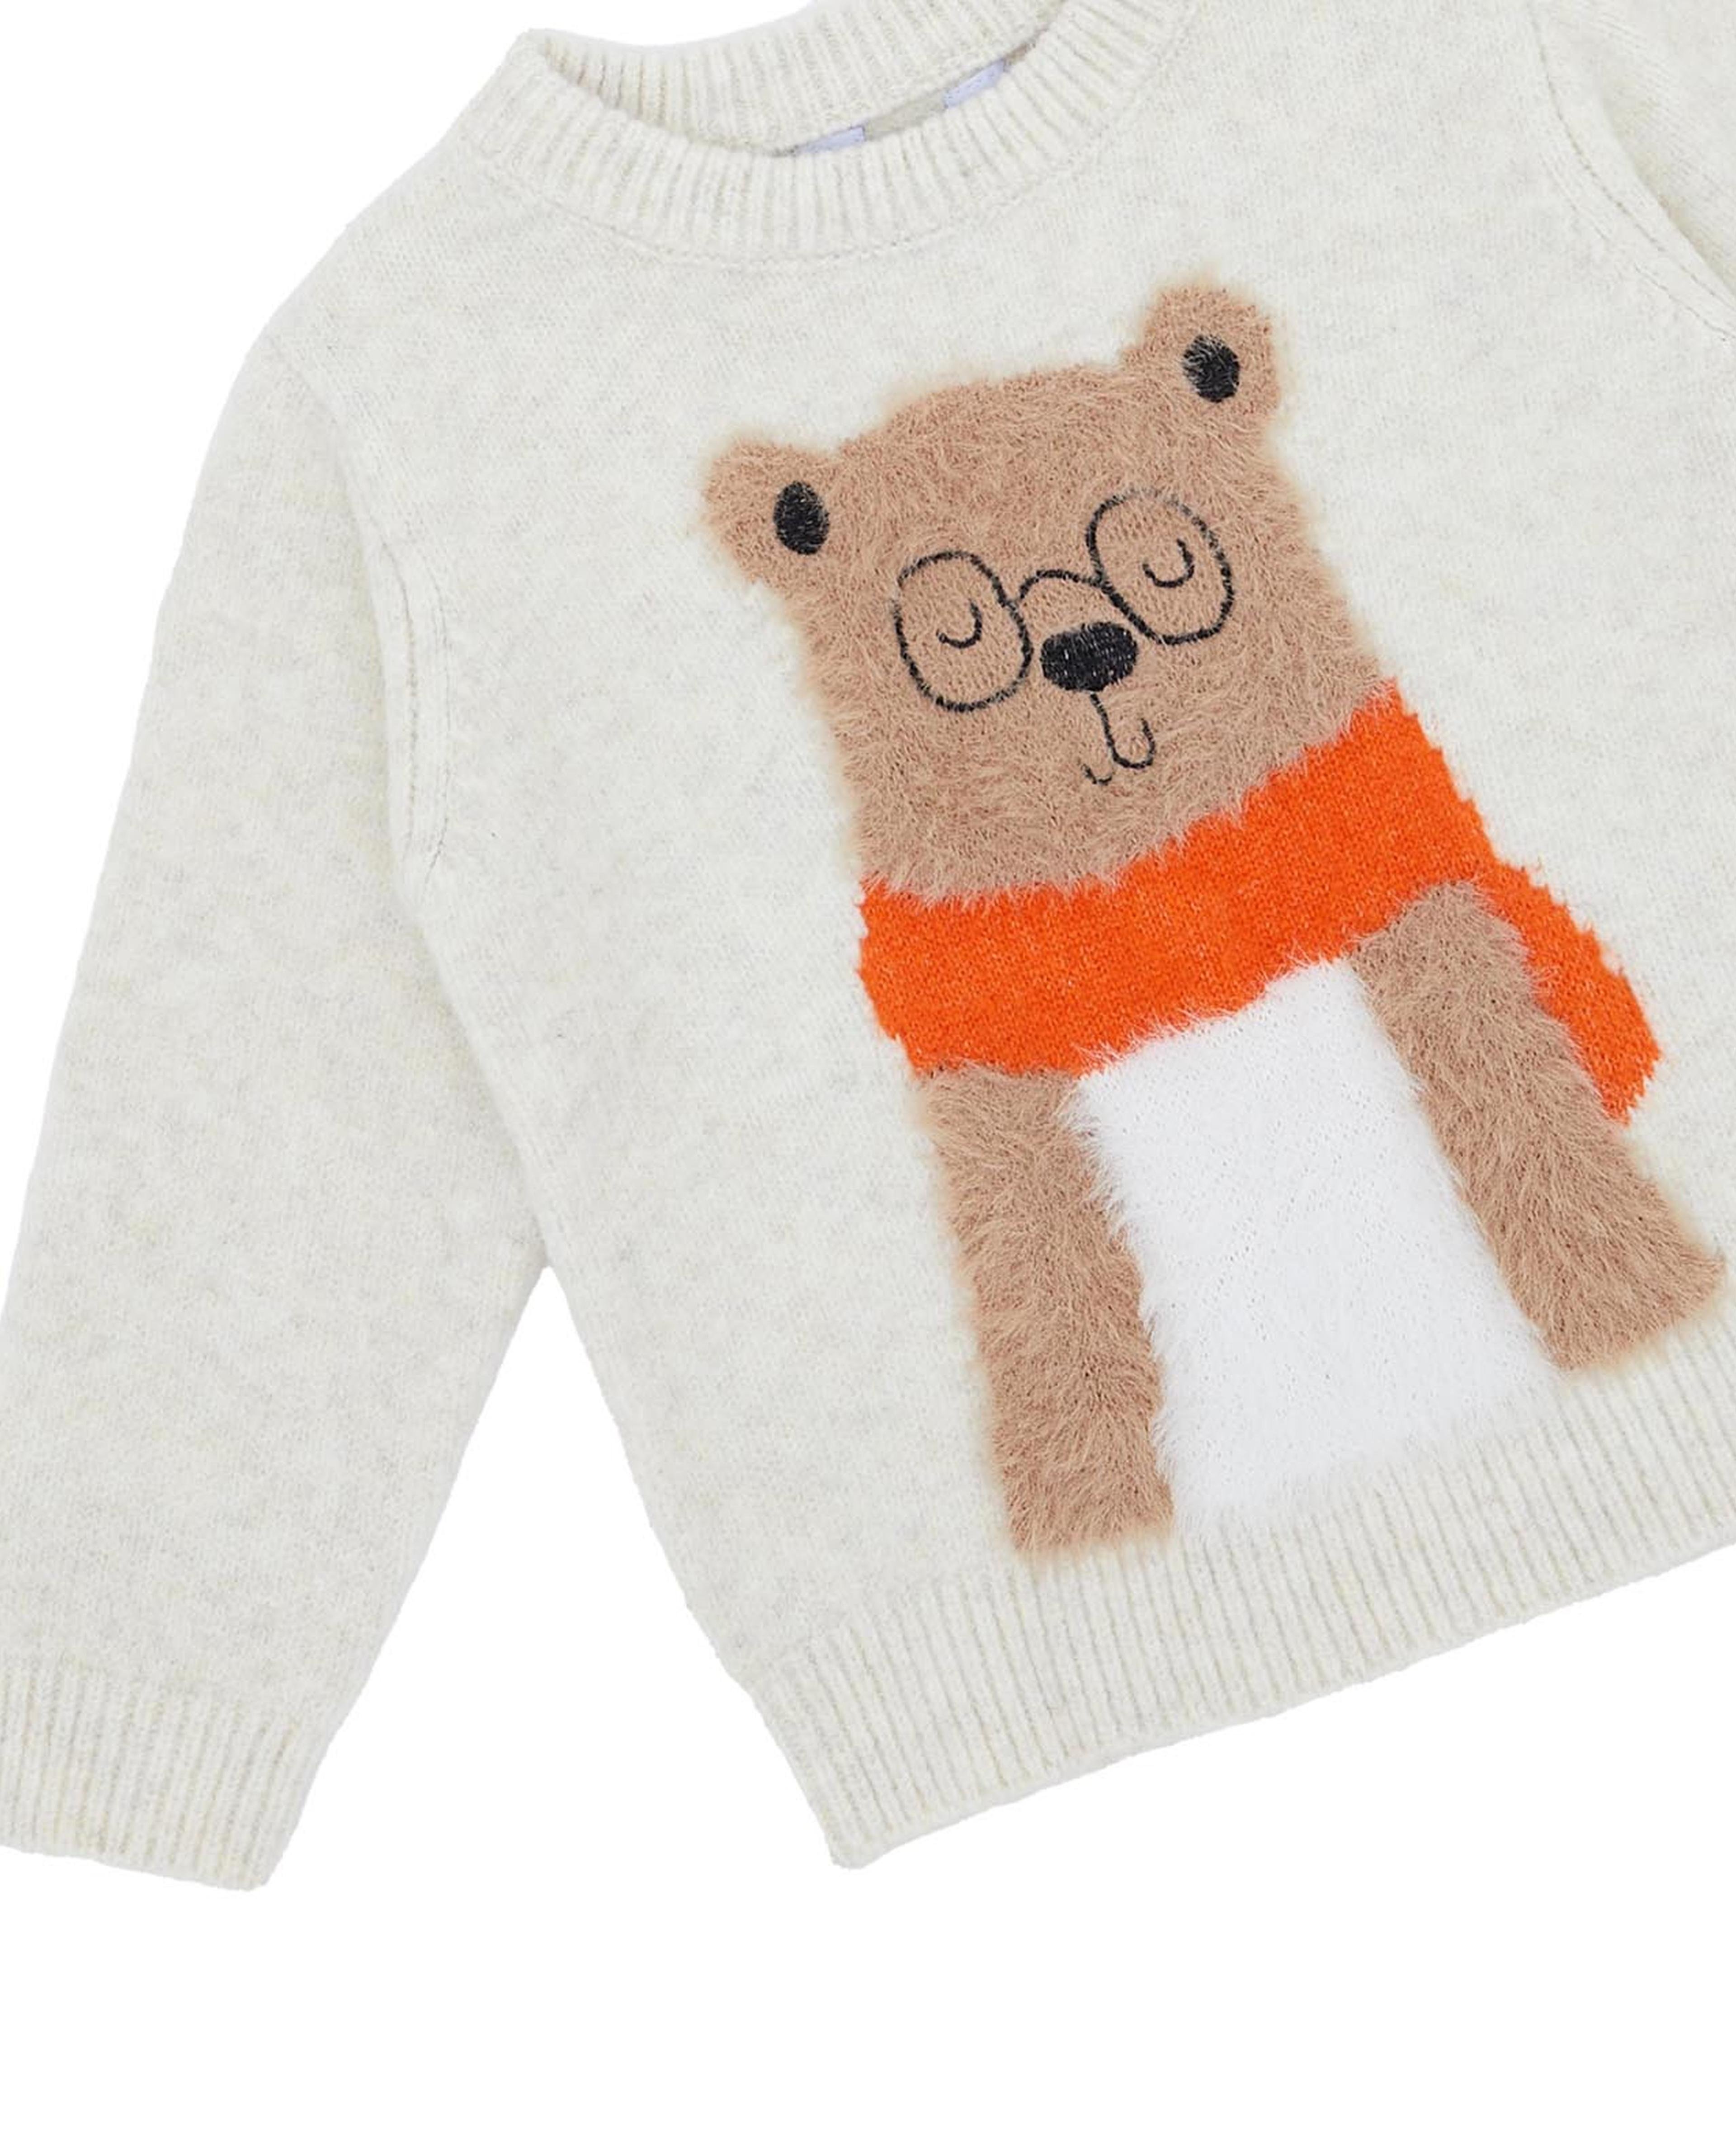 Bear Knitted Sweater with Crew Neck and Long Sleeves